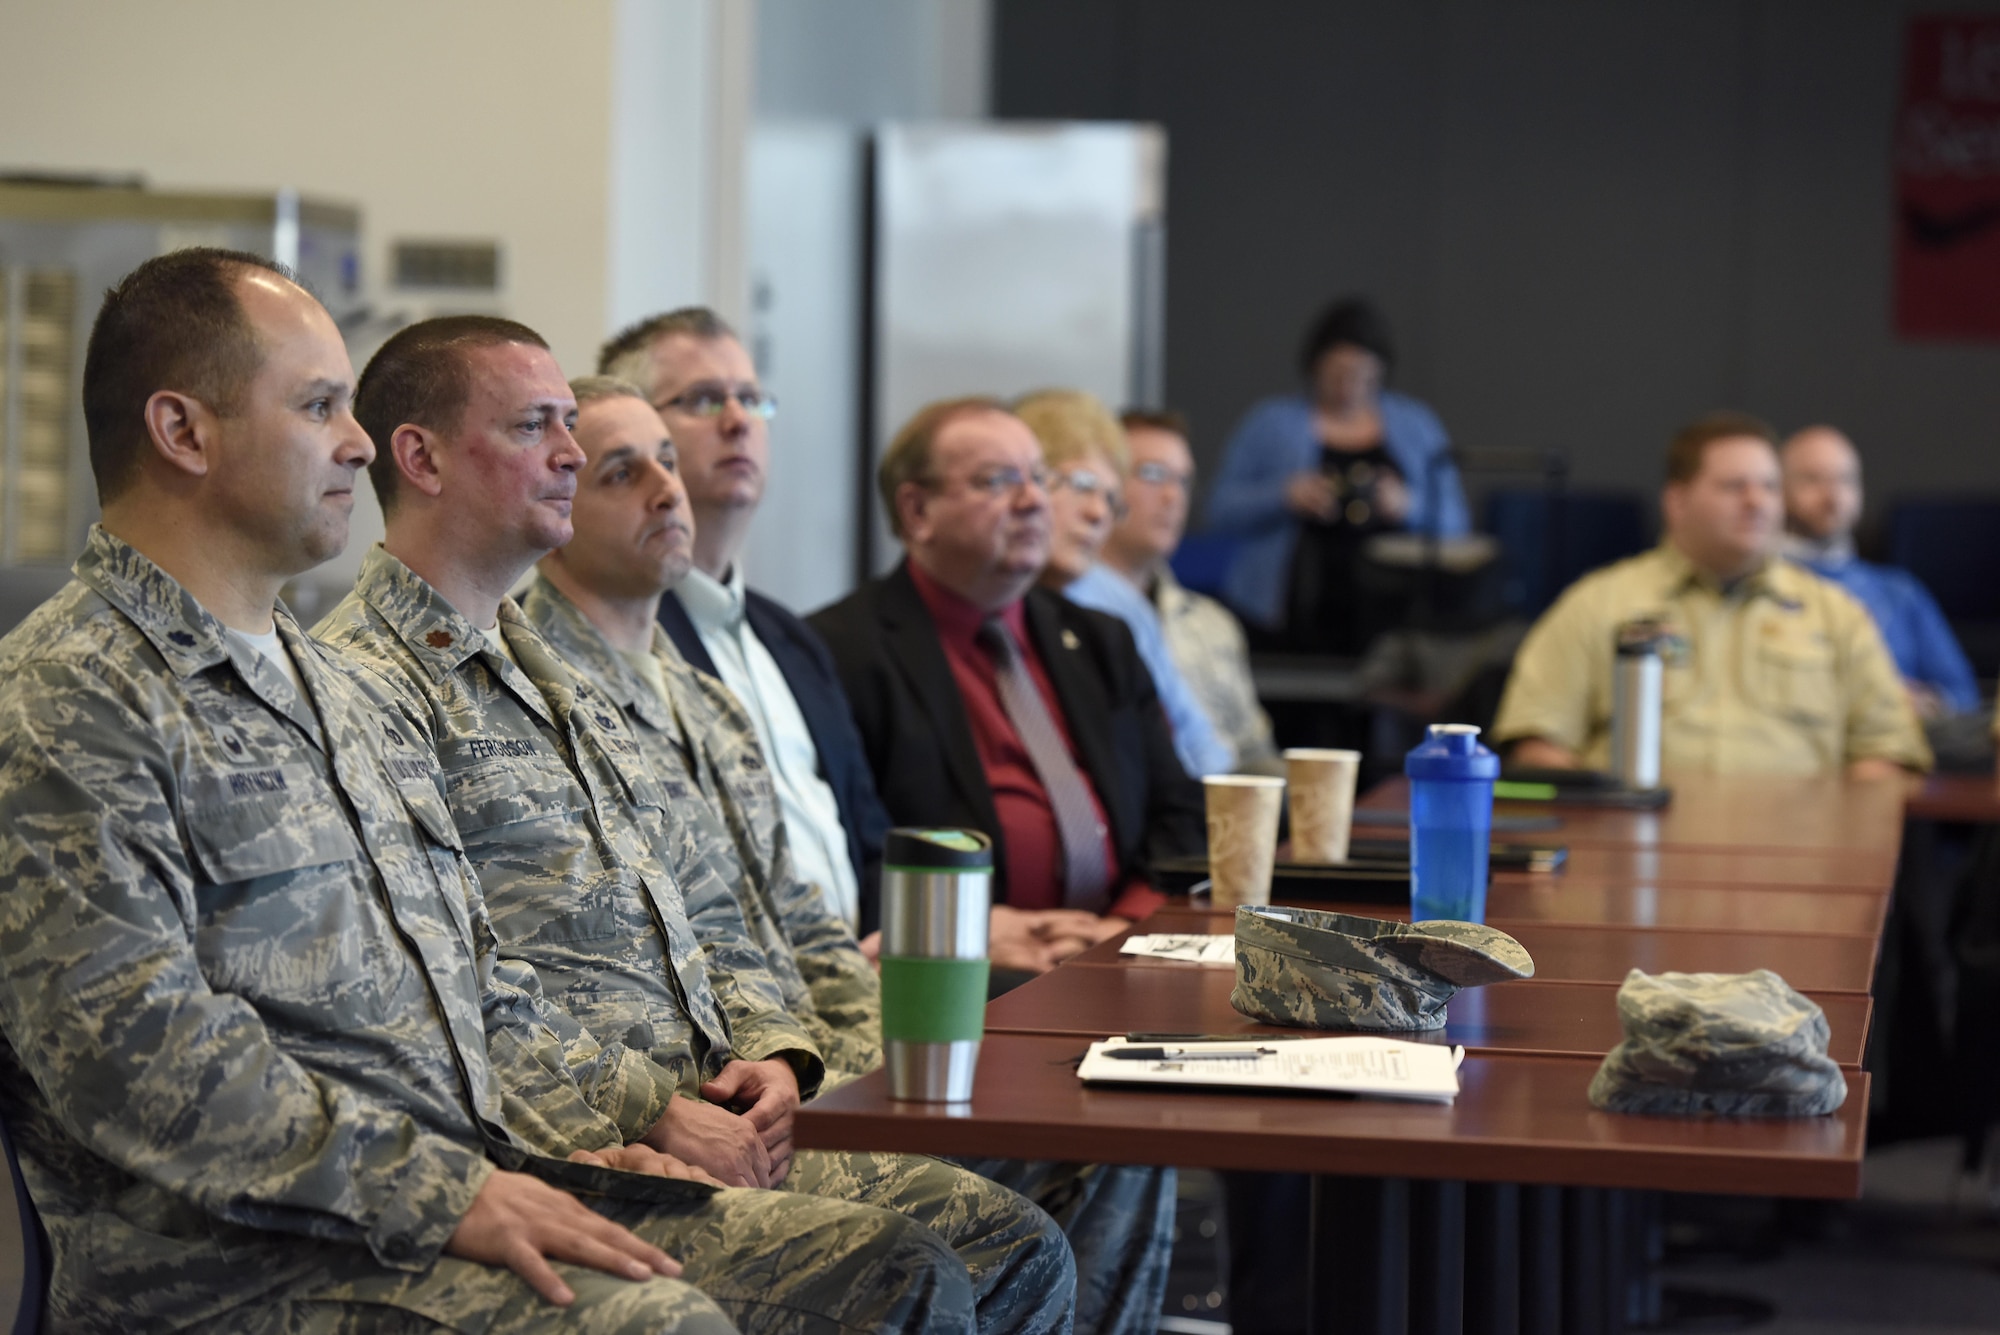 U.S. Air Force Airmen assigned to the 180th Fighter Wing, Ohio Air National Guard attend an Air Force Community Partnership meeting March 22, 2017 with local community leaders from five local-area universities and the Boy Scouts of America's Erie Shores council to sign partnership agreements. The AFCP program has inspired 61 installations nationwide to partner with their local communities across a wide range of initiatives, tapping into the intellectual capital and innovative spirit of Airmen and community leaders across the nation to develop creative ways to accomplish the U.S. Air Force mission and strengthen local communities. (U.S. Air National Guard photo by Staff Sgt. Shane Hughes)